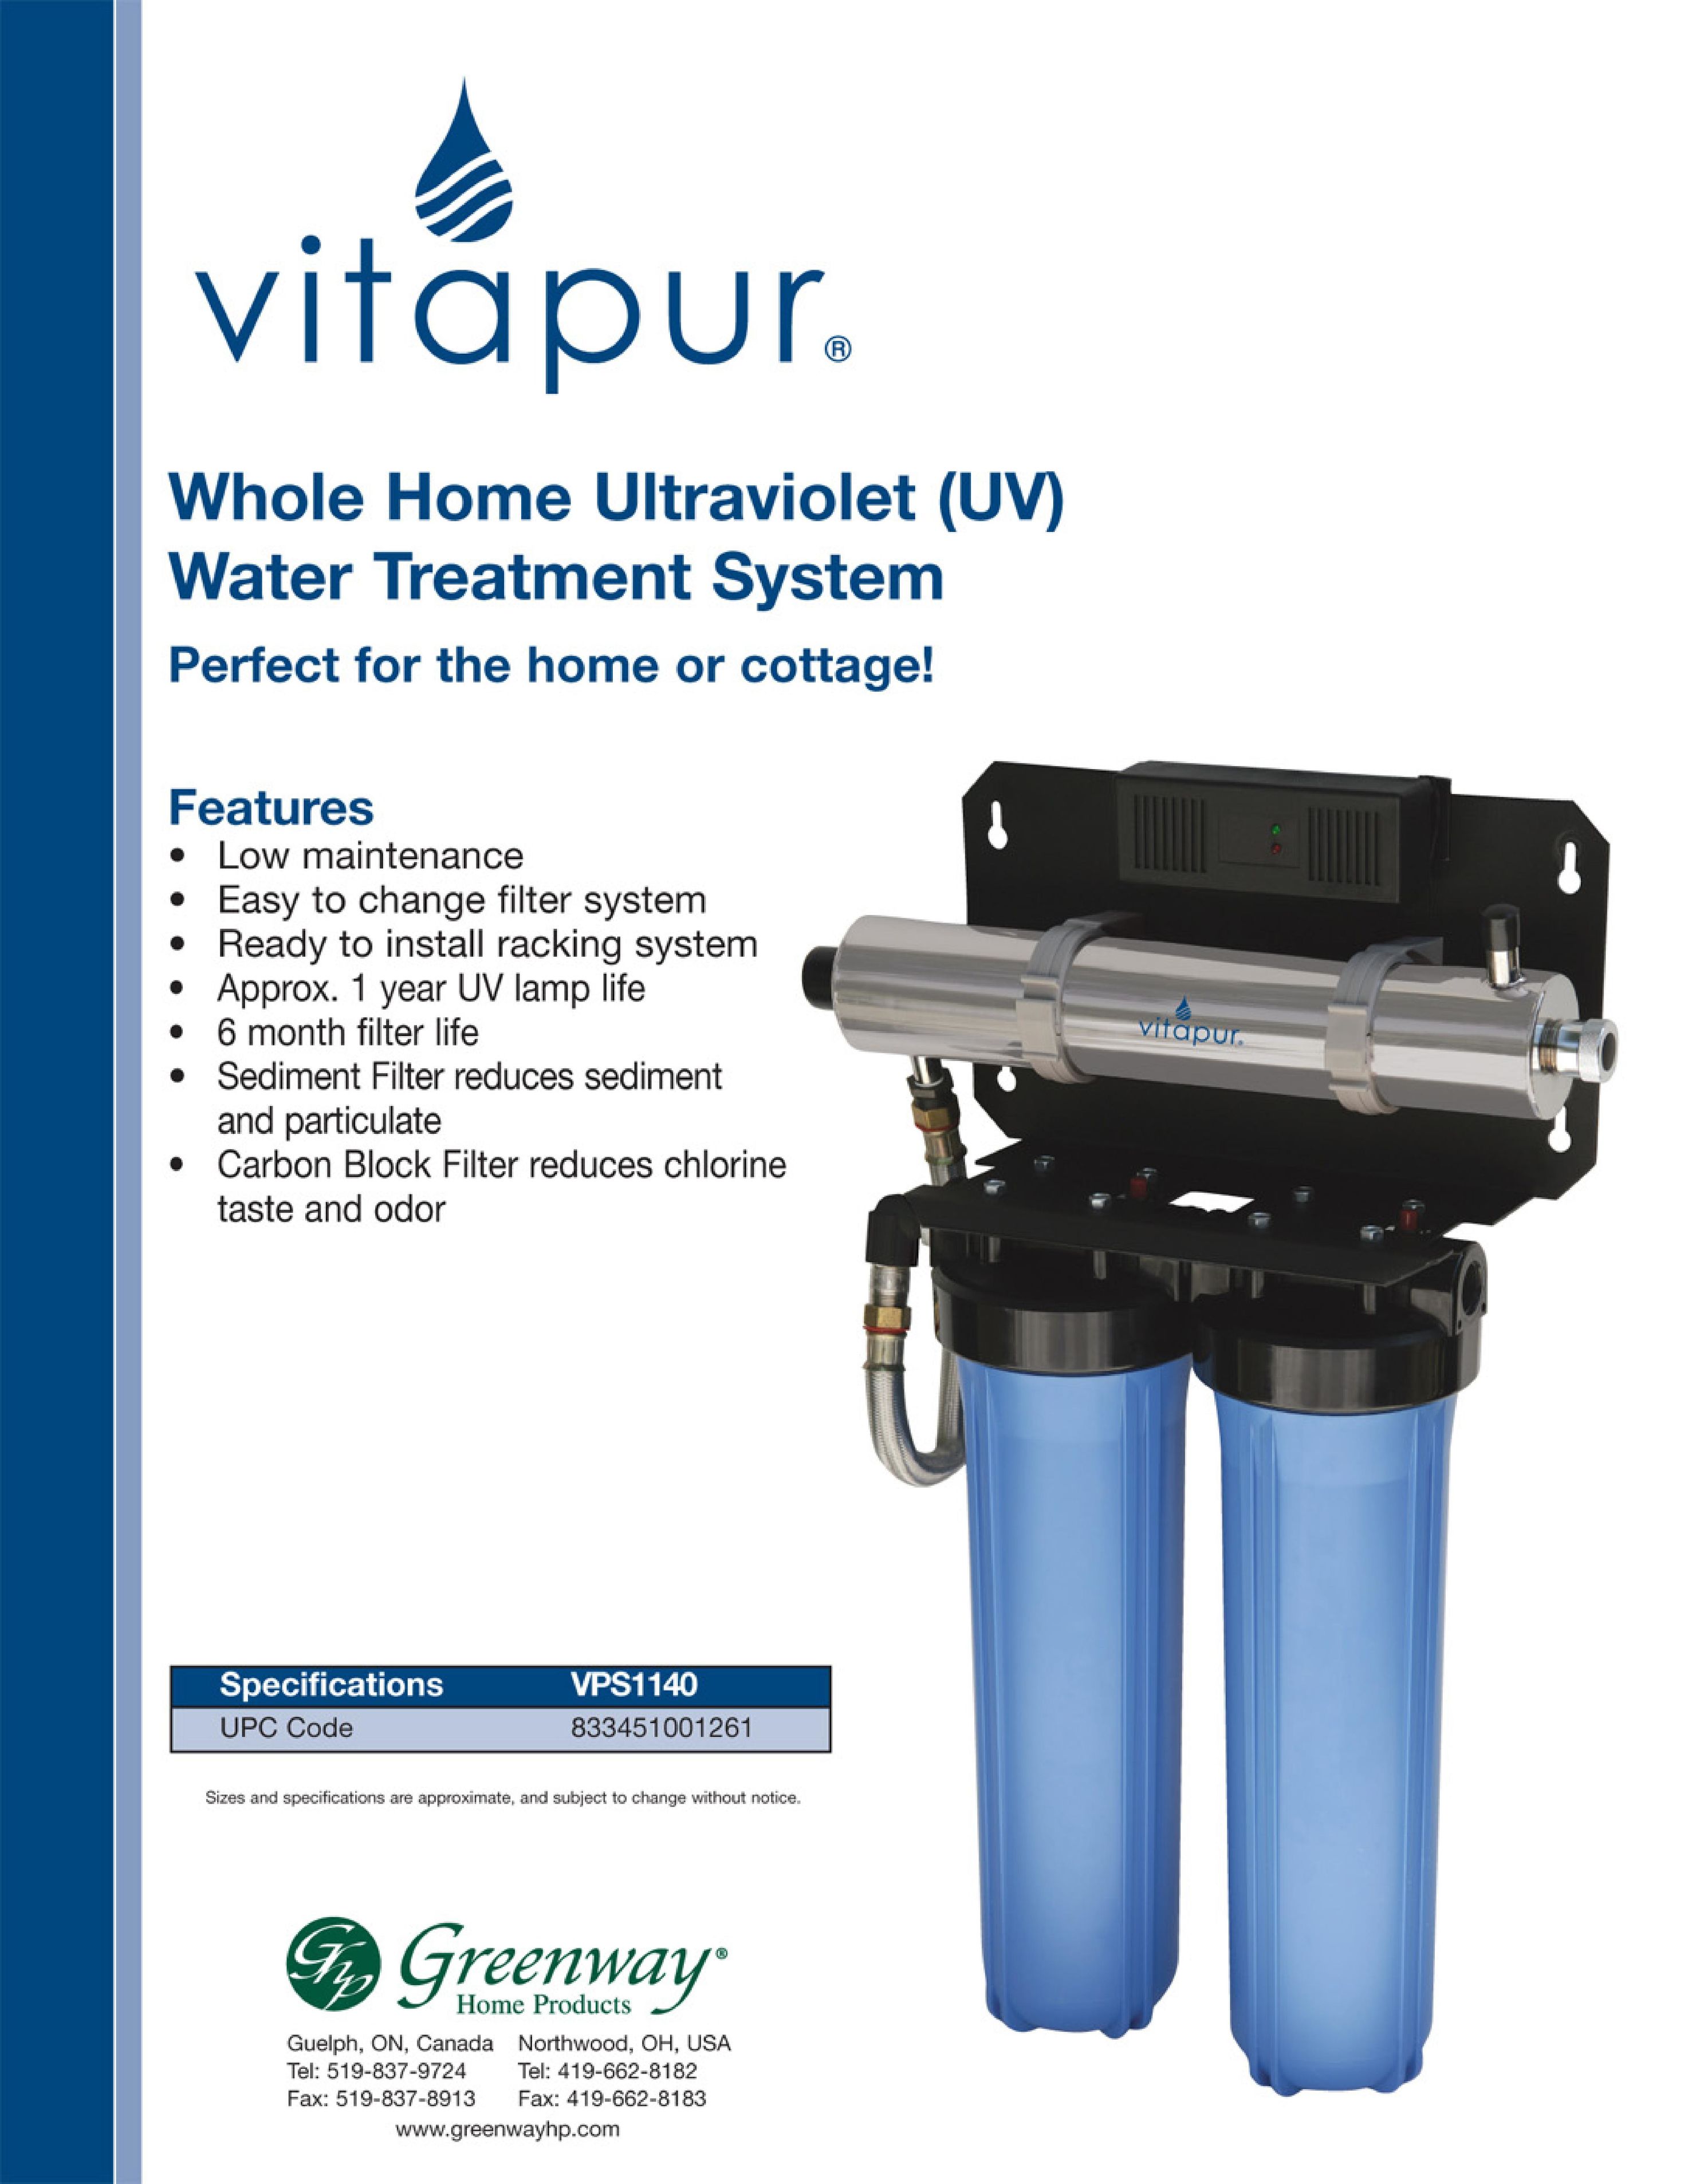 Greenway Home Products VPS1140 Water System User Manual